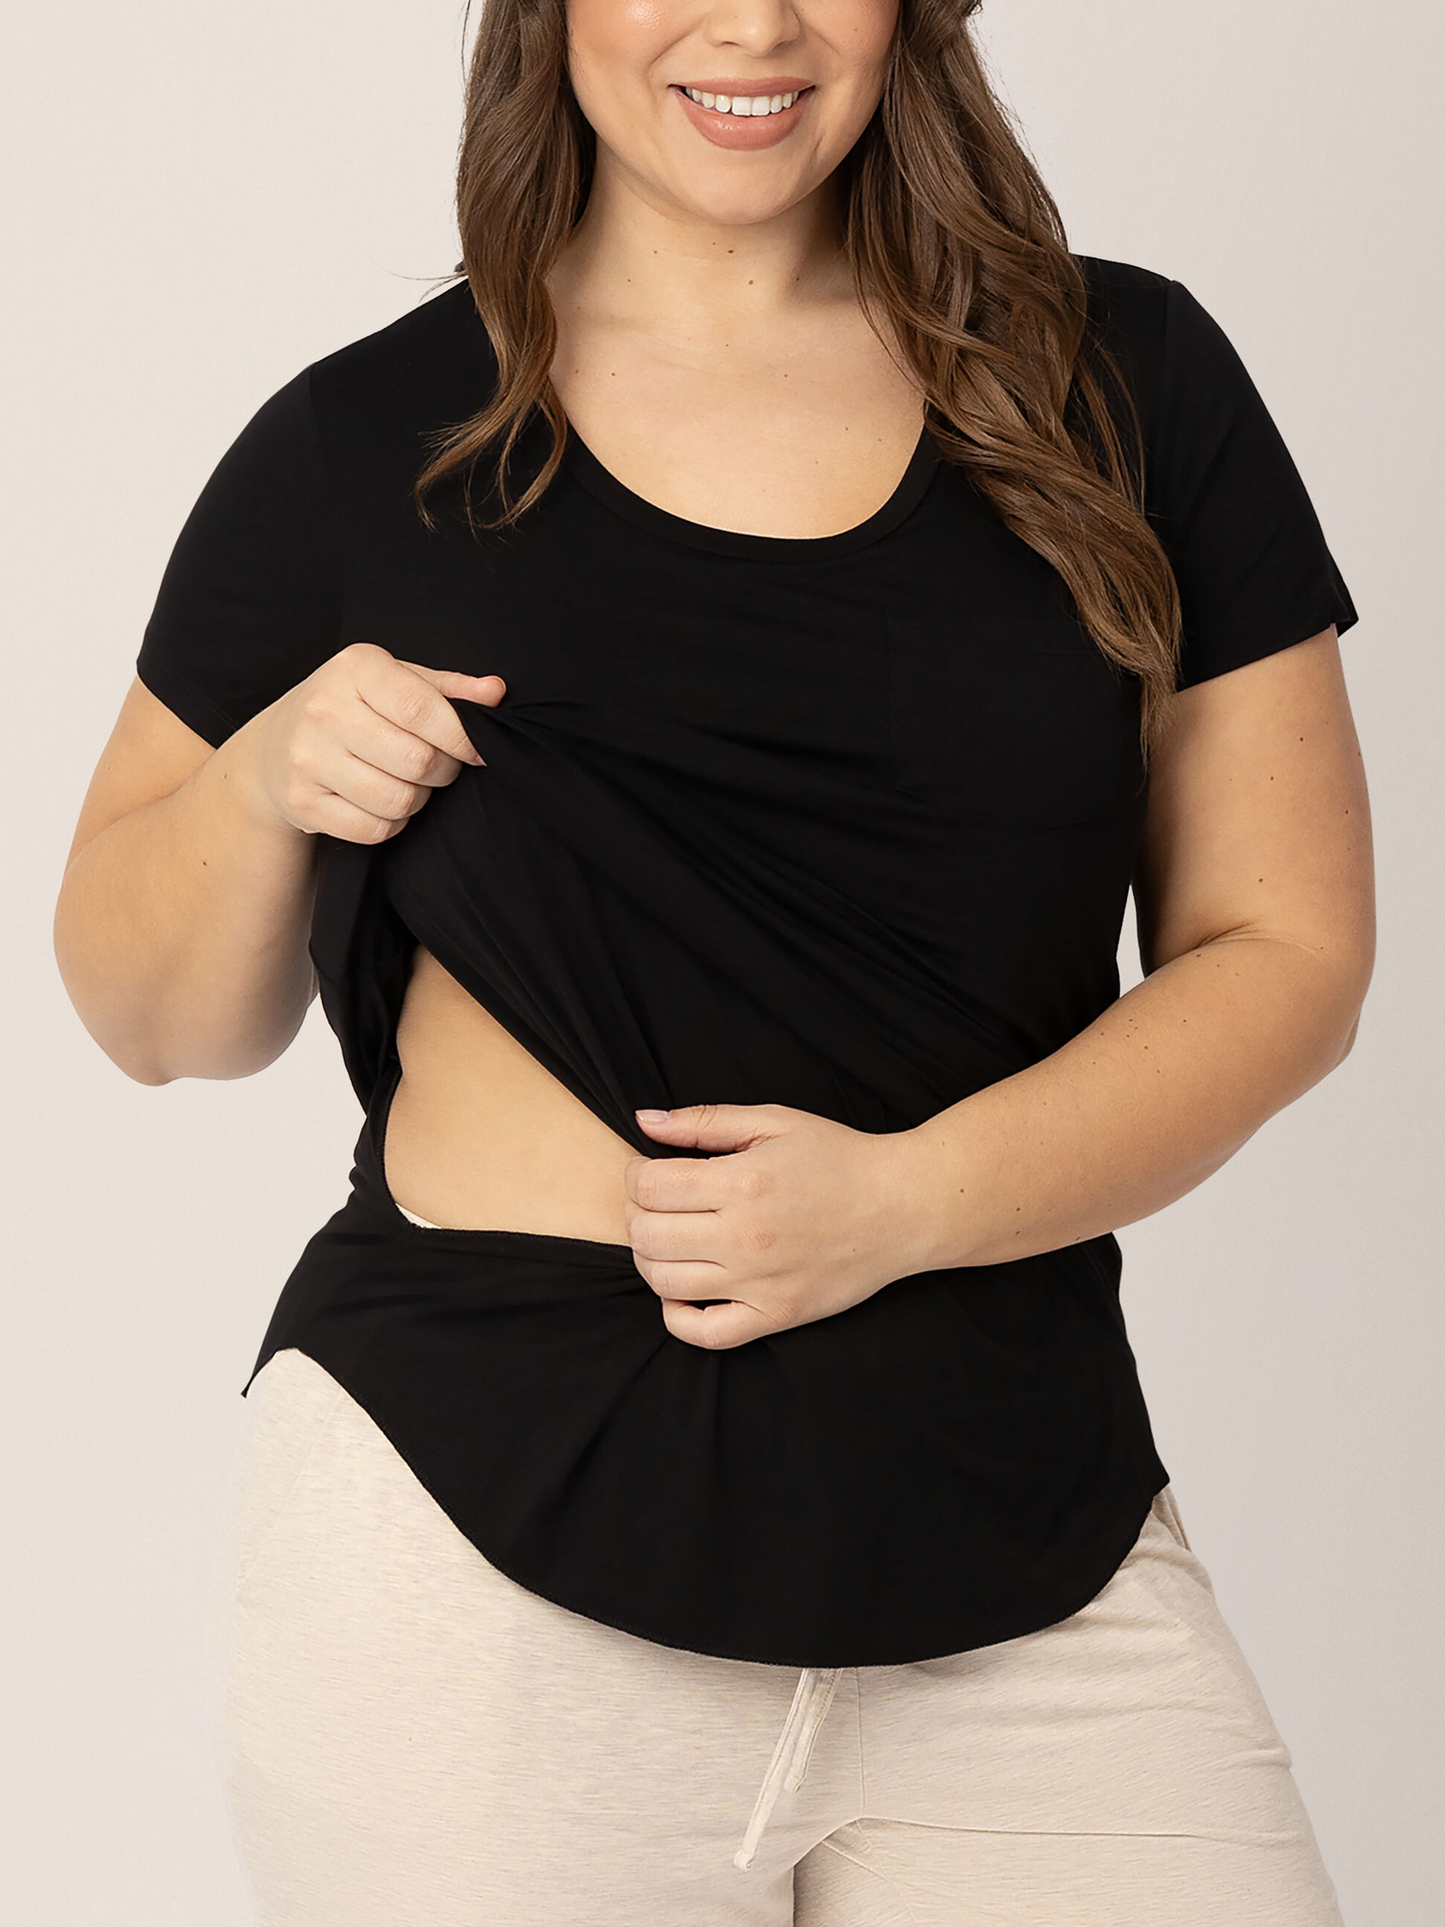 Model wearing the Everyday Maternity & Nursing T-shirt in Black with a pocket showing the nursing panel.